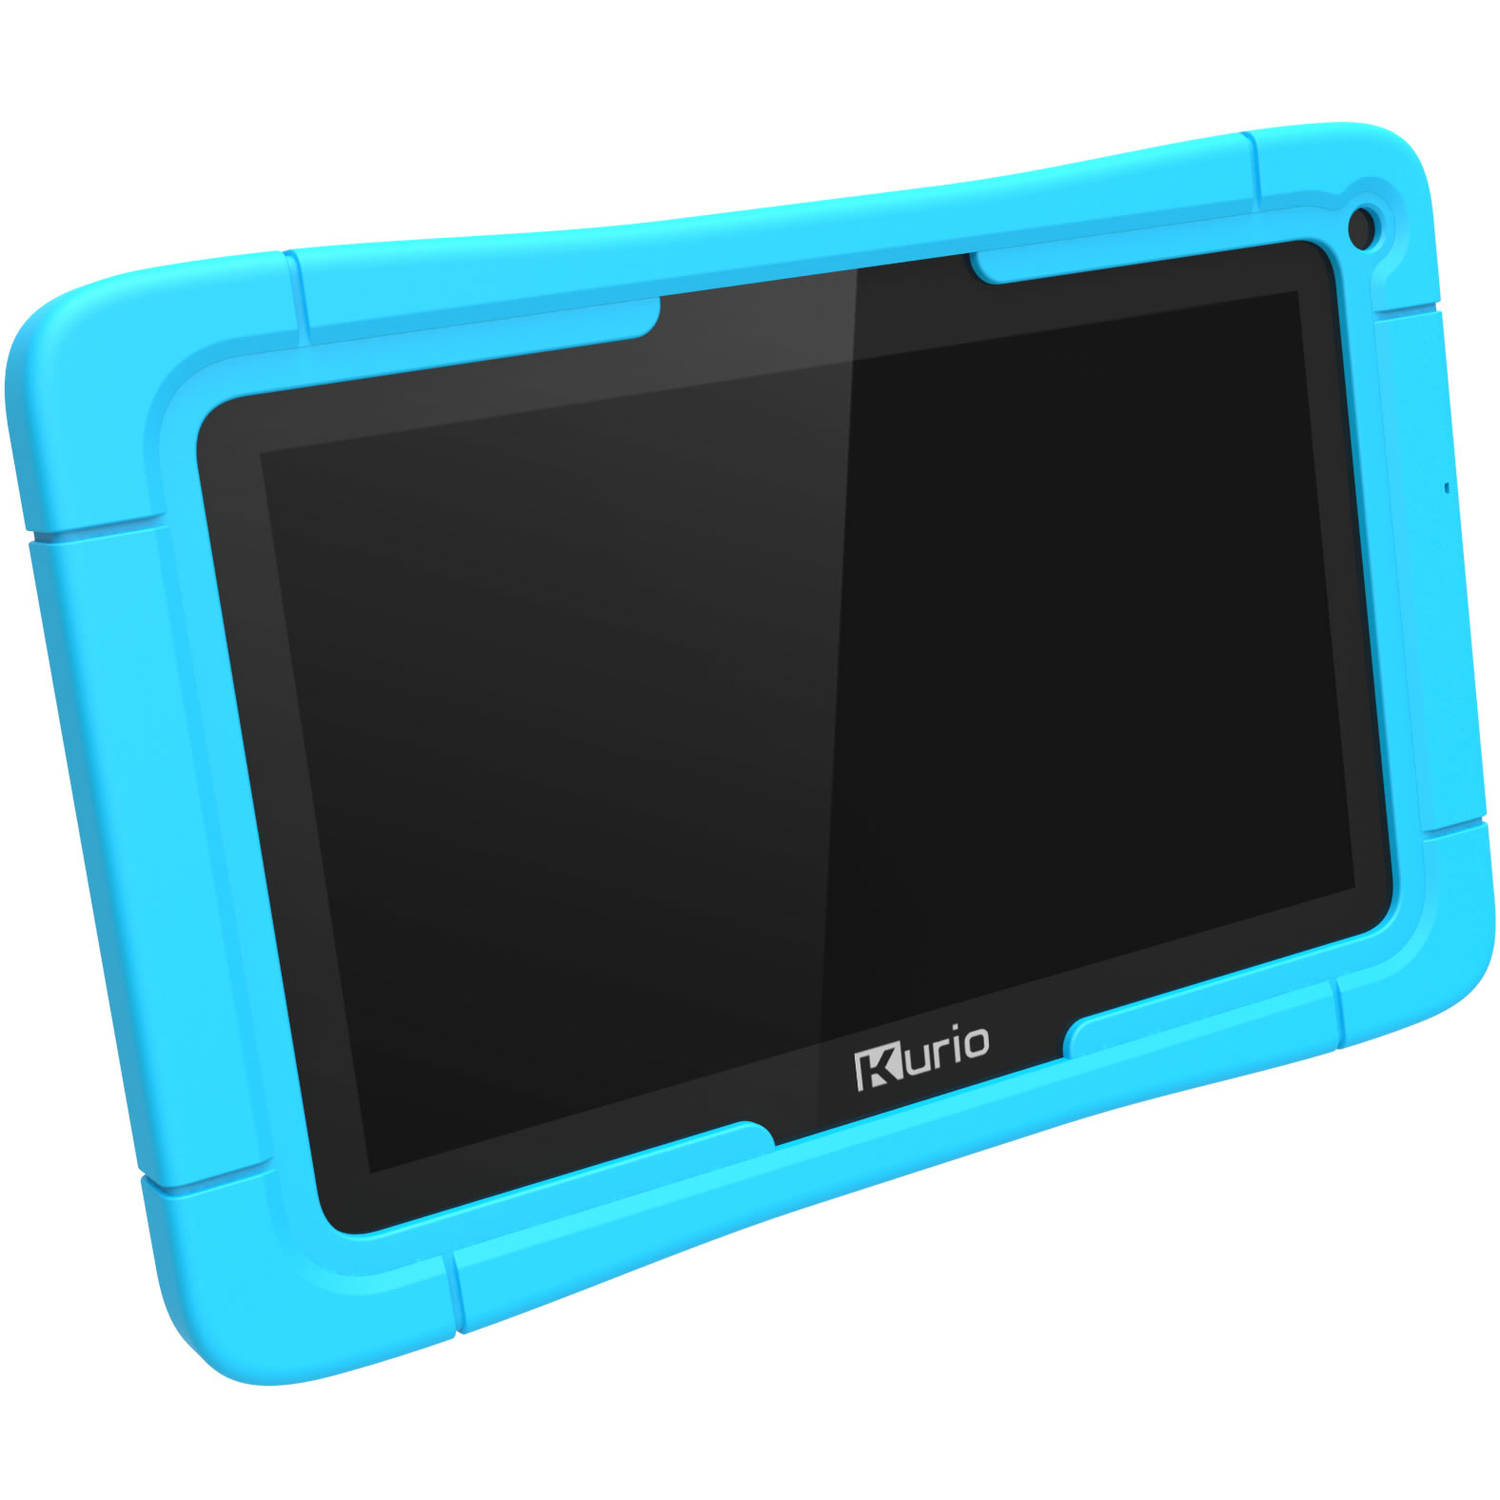 Kurio Tab 2 Android and Intel-powered 8GB 7" Touchscreen - image 2 of 5